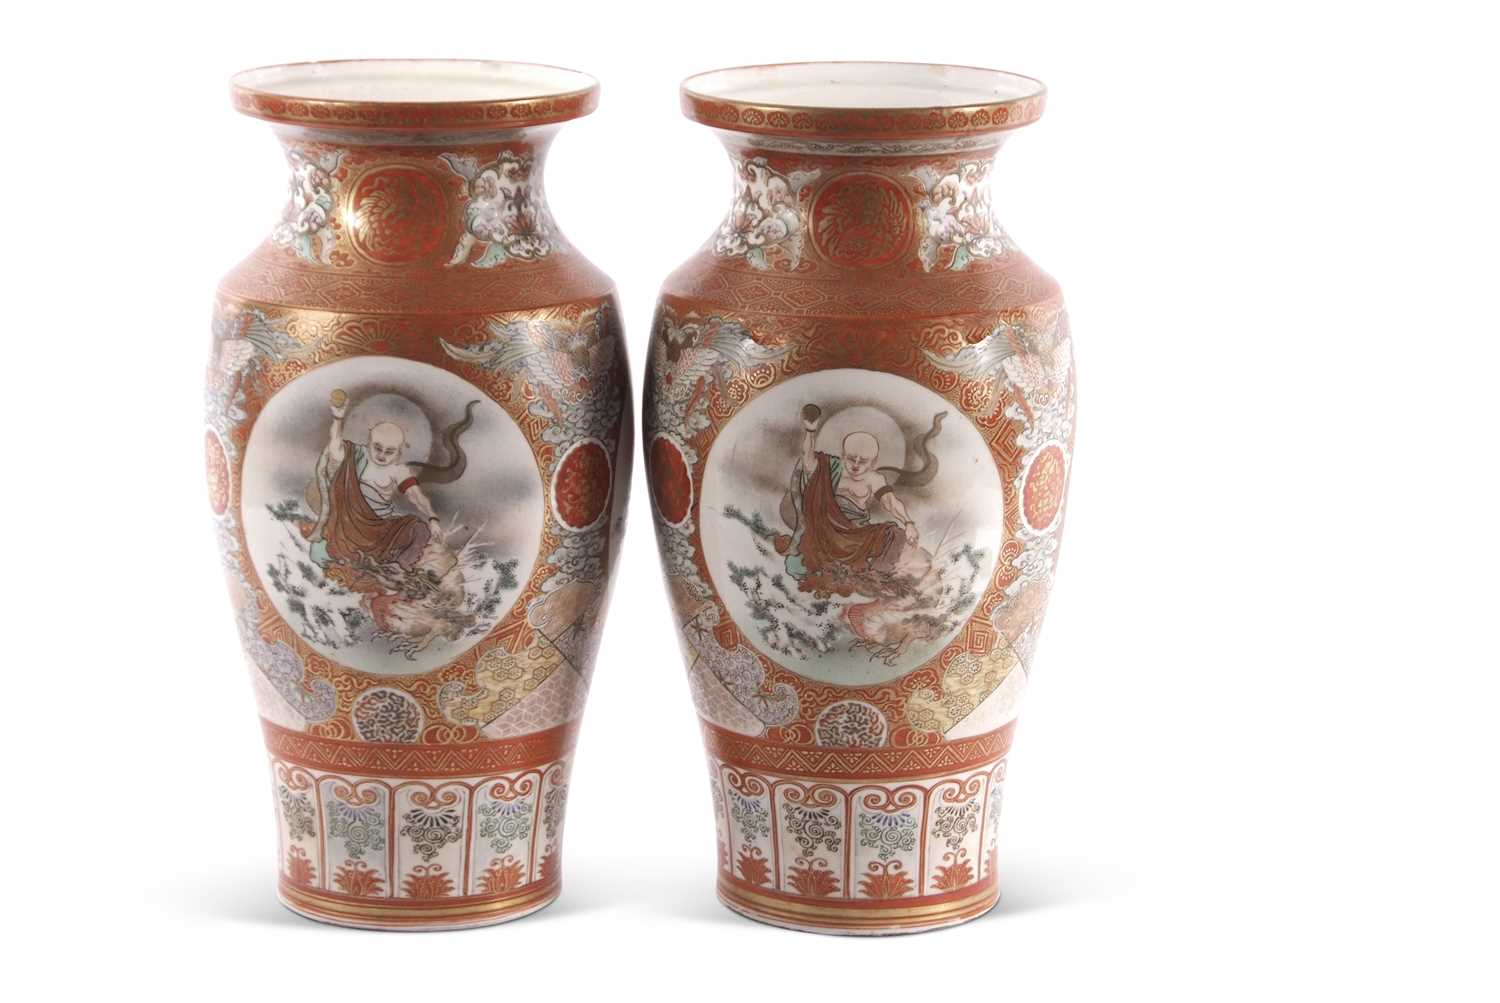 Large pair of Japanese porcelain vases Meiji period decorated with central panels of Japanese